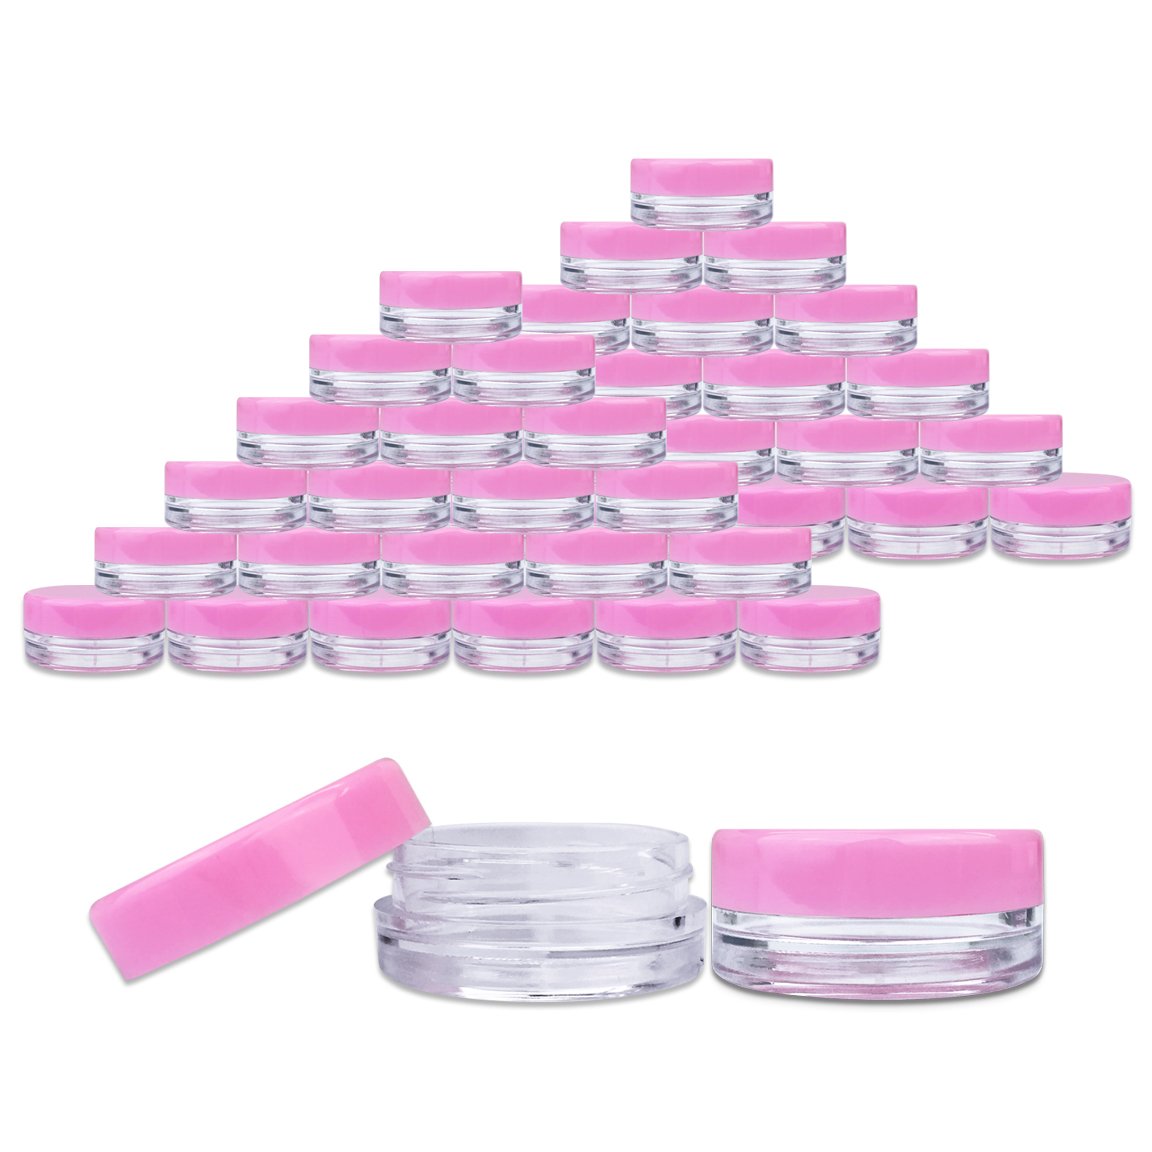 Beauticom 3G/3ML Round Clear Jars with Pink Lids for Acrylic Powder, Rhinestones, Charms and Other Nail Accessories - BPA Free (Quantity: 100 Pieces)